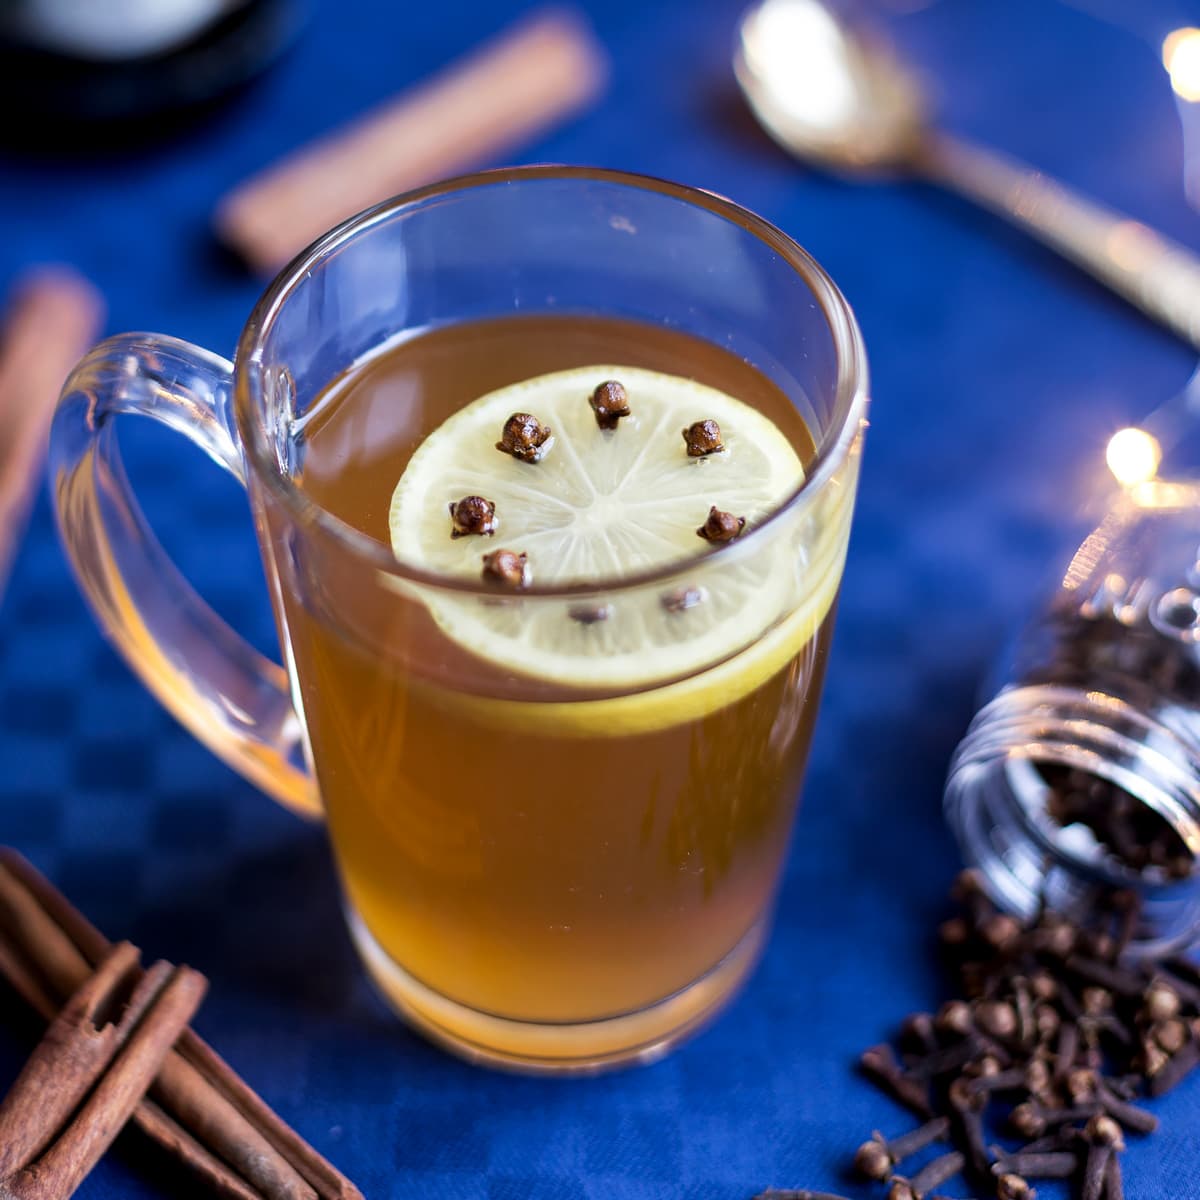 Closeup showing clove decorated lemon slice floating on top of hot beer drink.